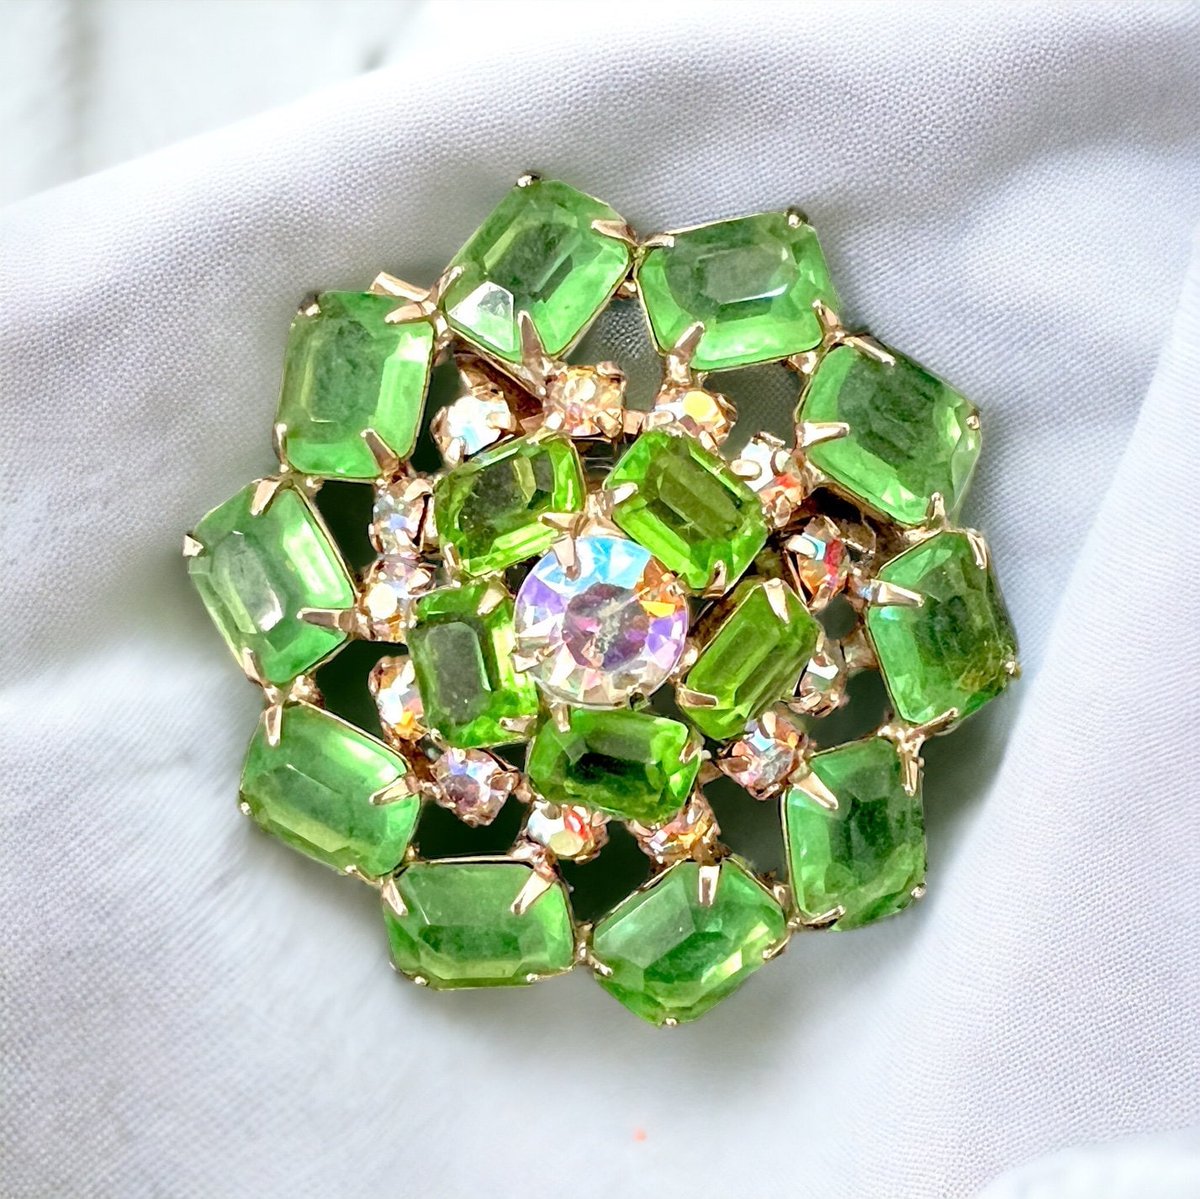 Frosted Green & AB Rhinestone Brooch Open Back Emerald Cut Green Stones Golden AB Chatons Soft GT Slightly Domed Gift for Her #FrostedGreenStones #RhinestoneBrooch 
$28.00
➤ etsy.com/listing/167054…